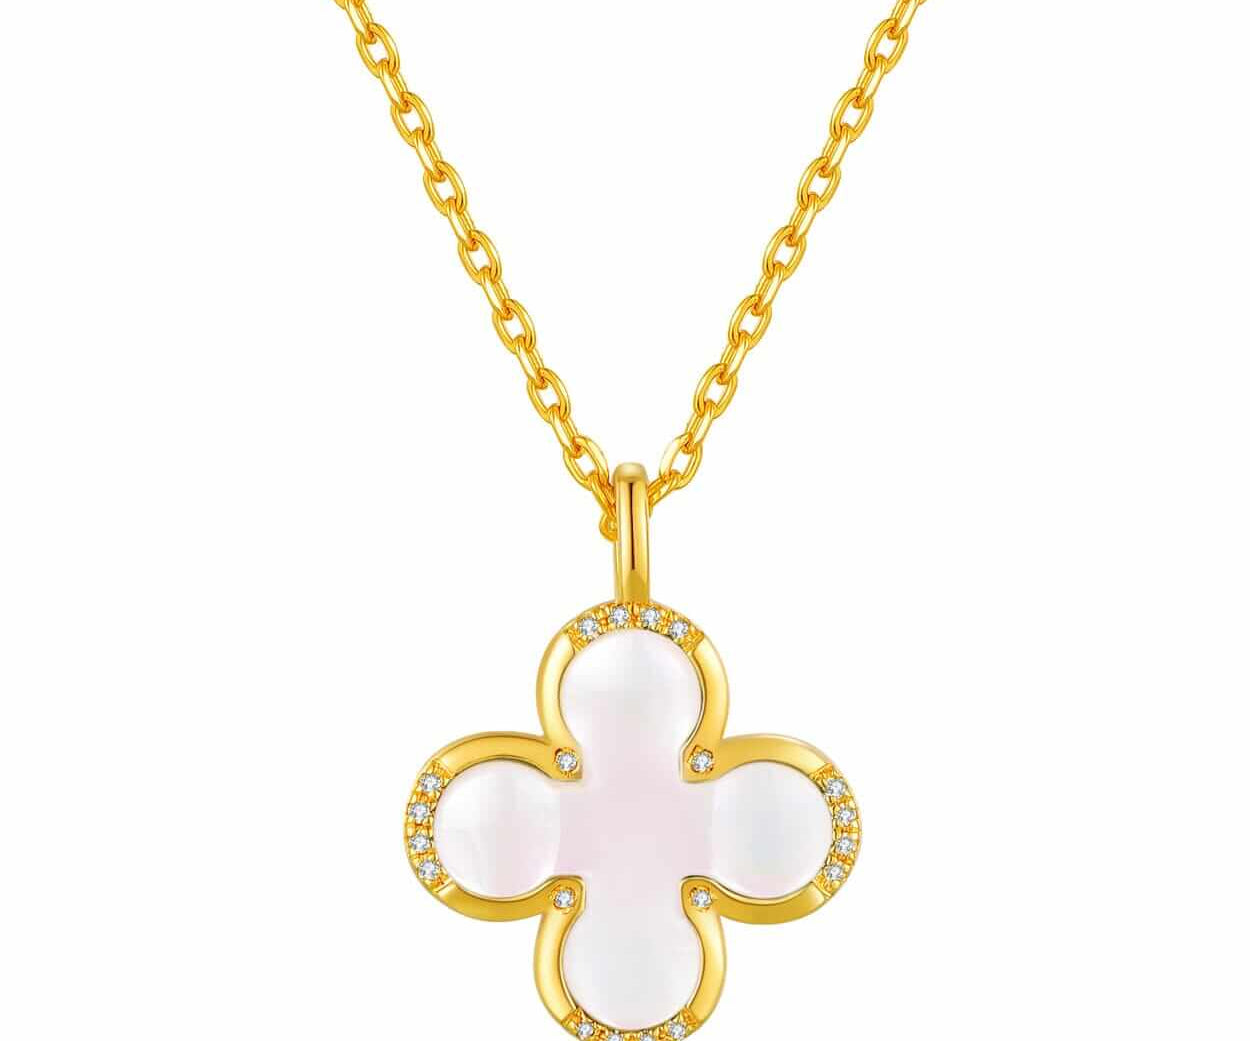 mother of pearl clover necklaceHandcrafted Fine Jewelry